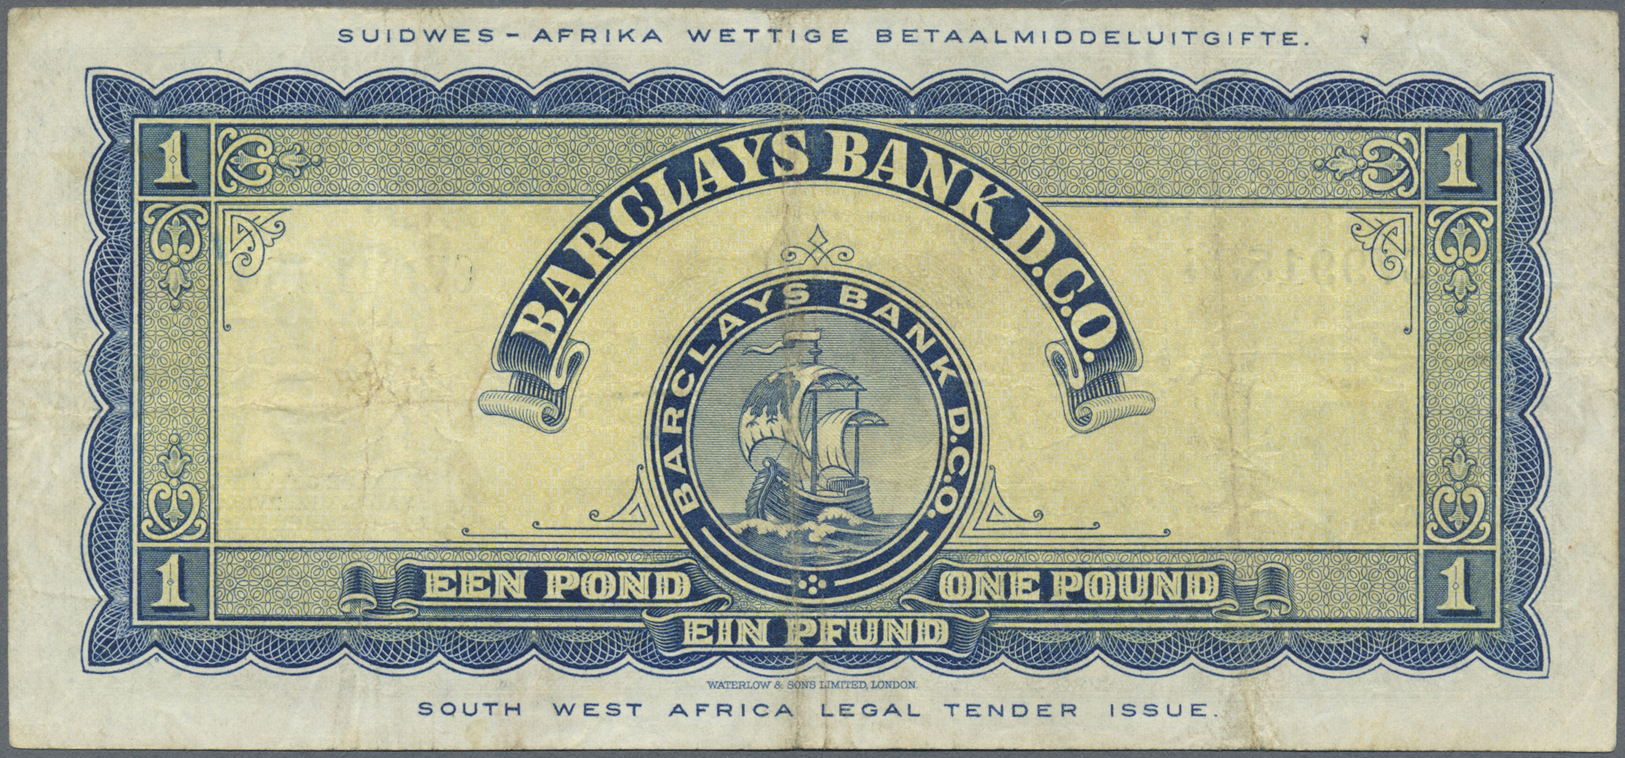 02979 Southwest Africa: 1 Pound 1958 P. 5b, Used With Several Folds And Creases, One Pinhole, Light Stain, Still Strong - Namibie